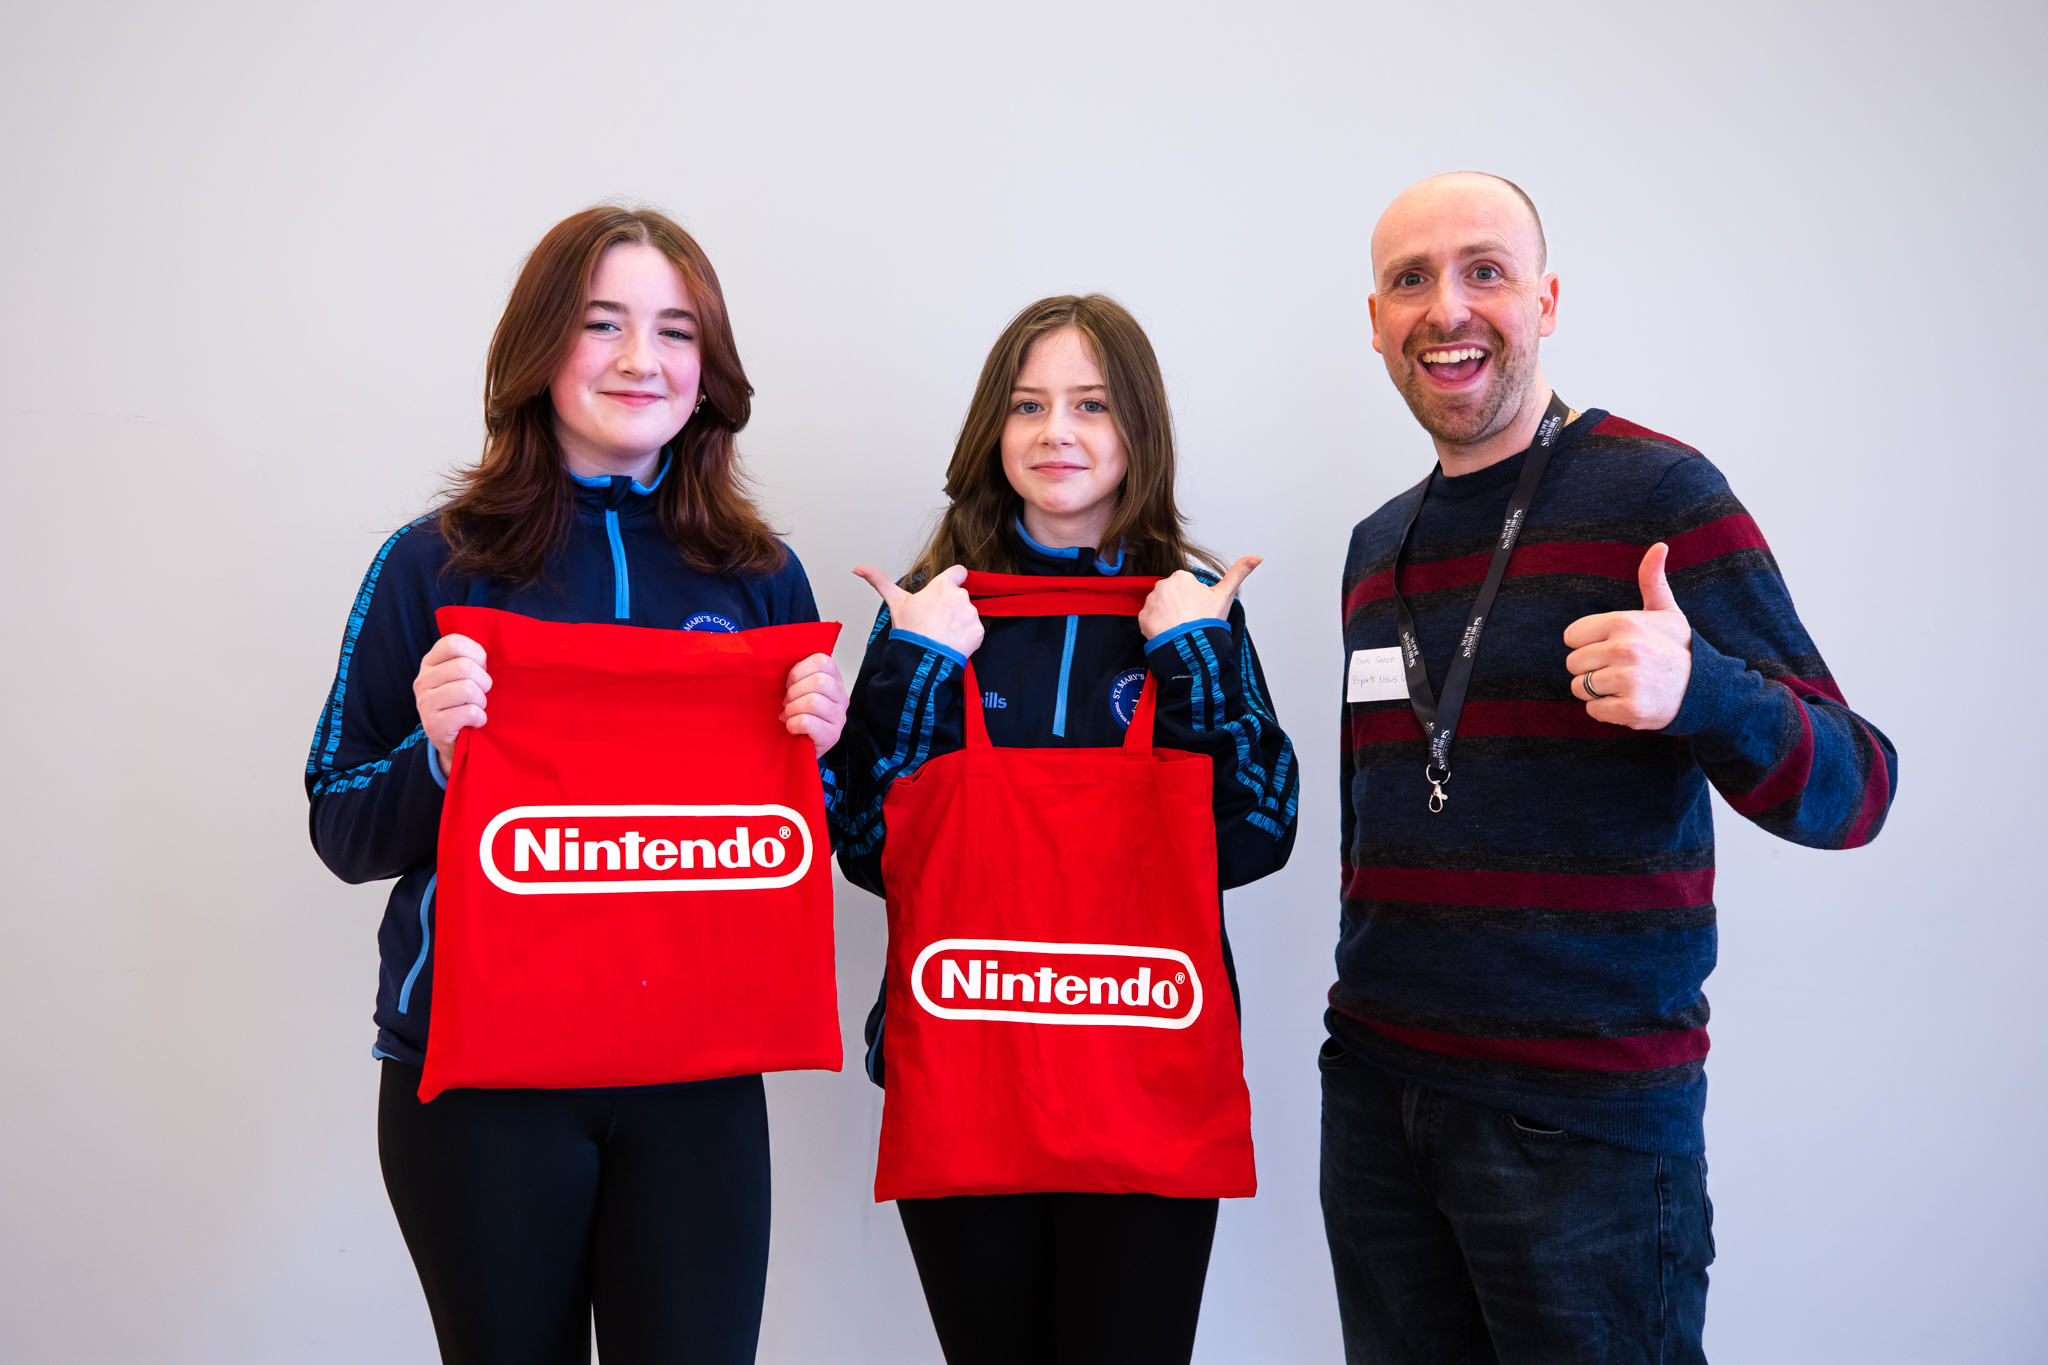 Erin and Orlaith show off their goody bags with Dom Sacco, who judged the competition and published the winning entry on Esports News UK.